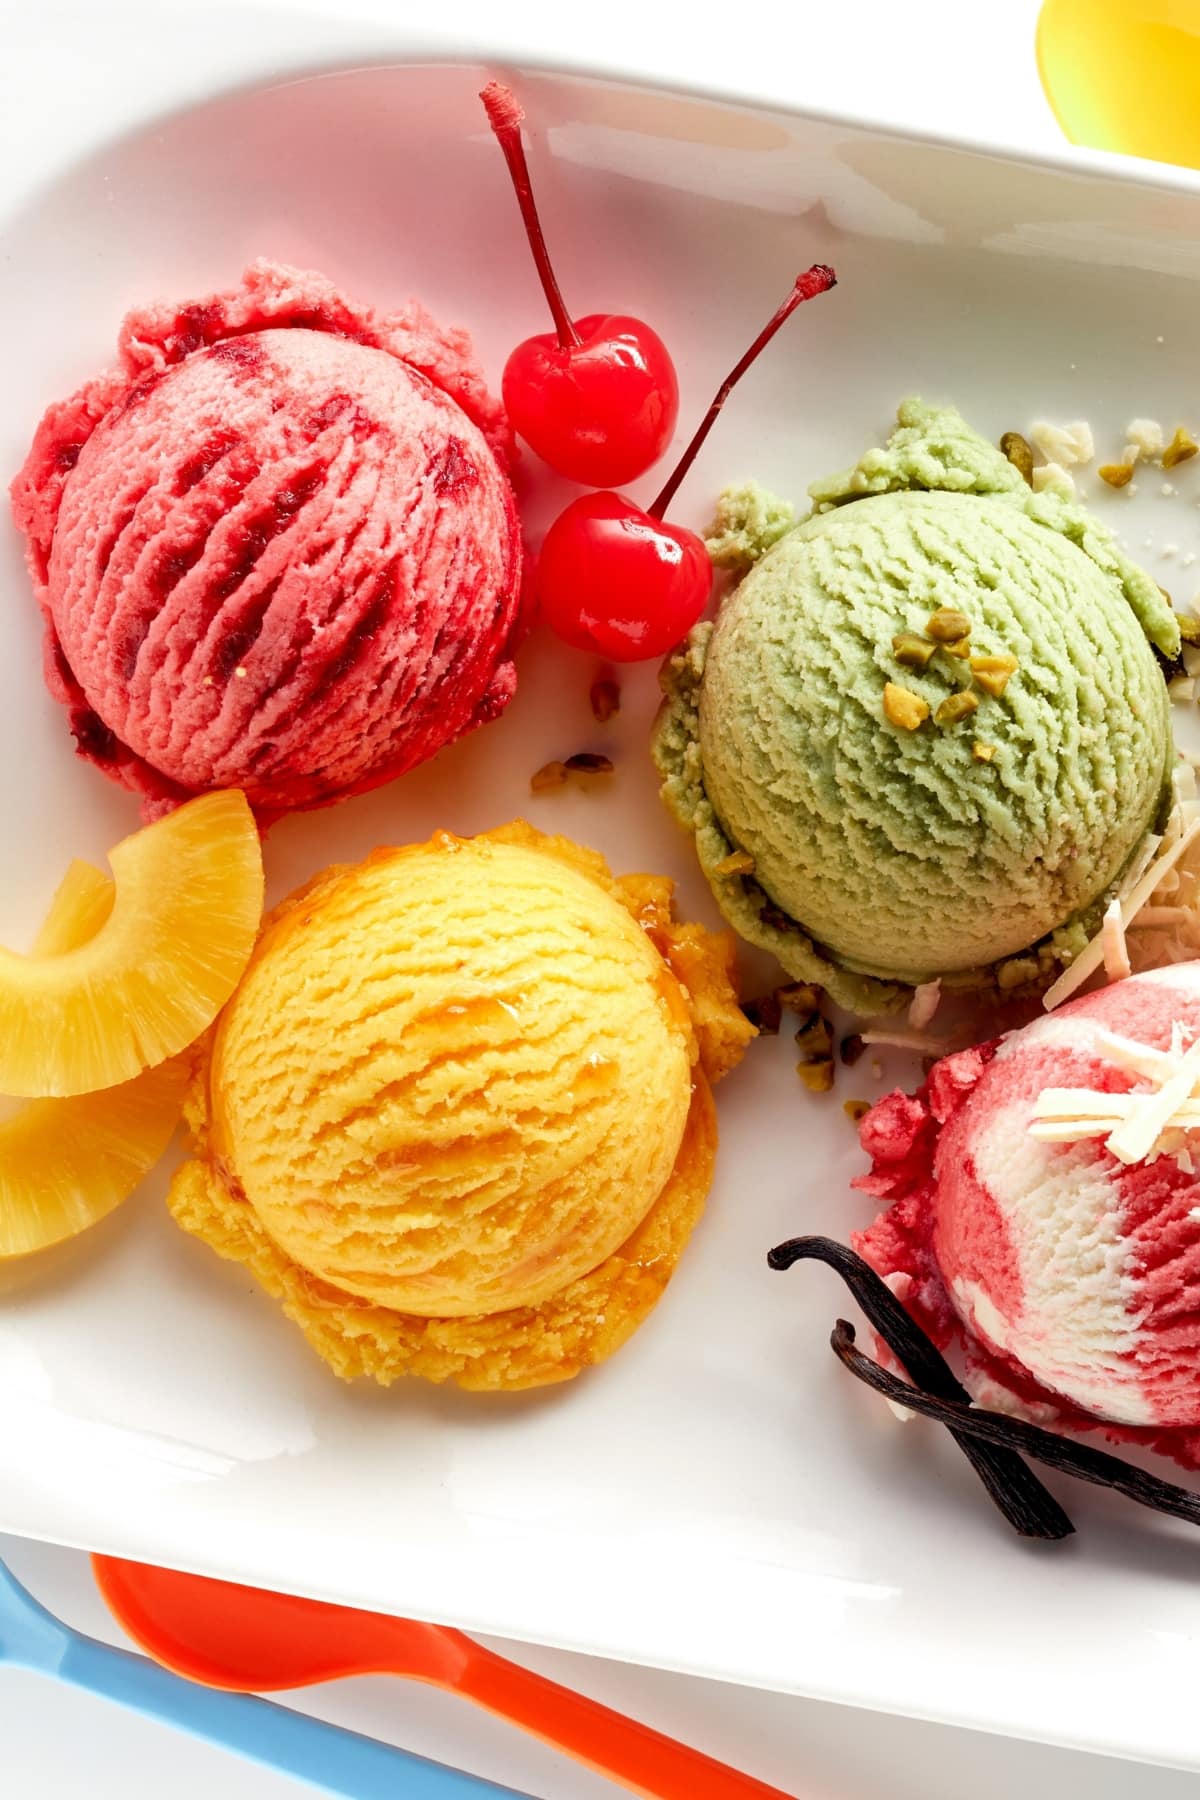 Sweet Cold Ice Cream Flavors with Pistachio, Pineapple and Cherry